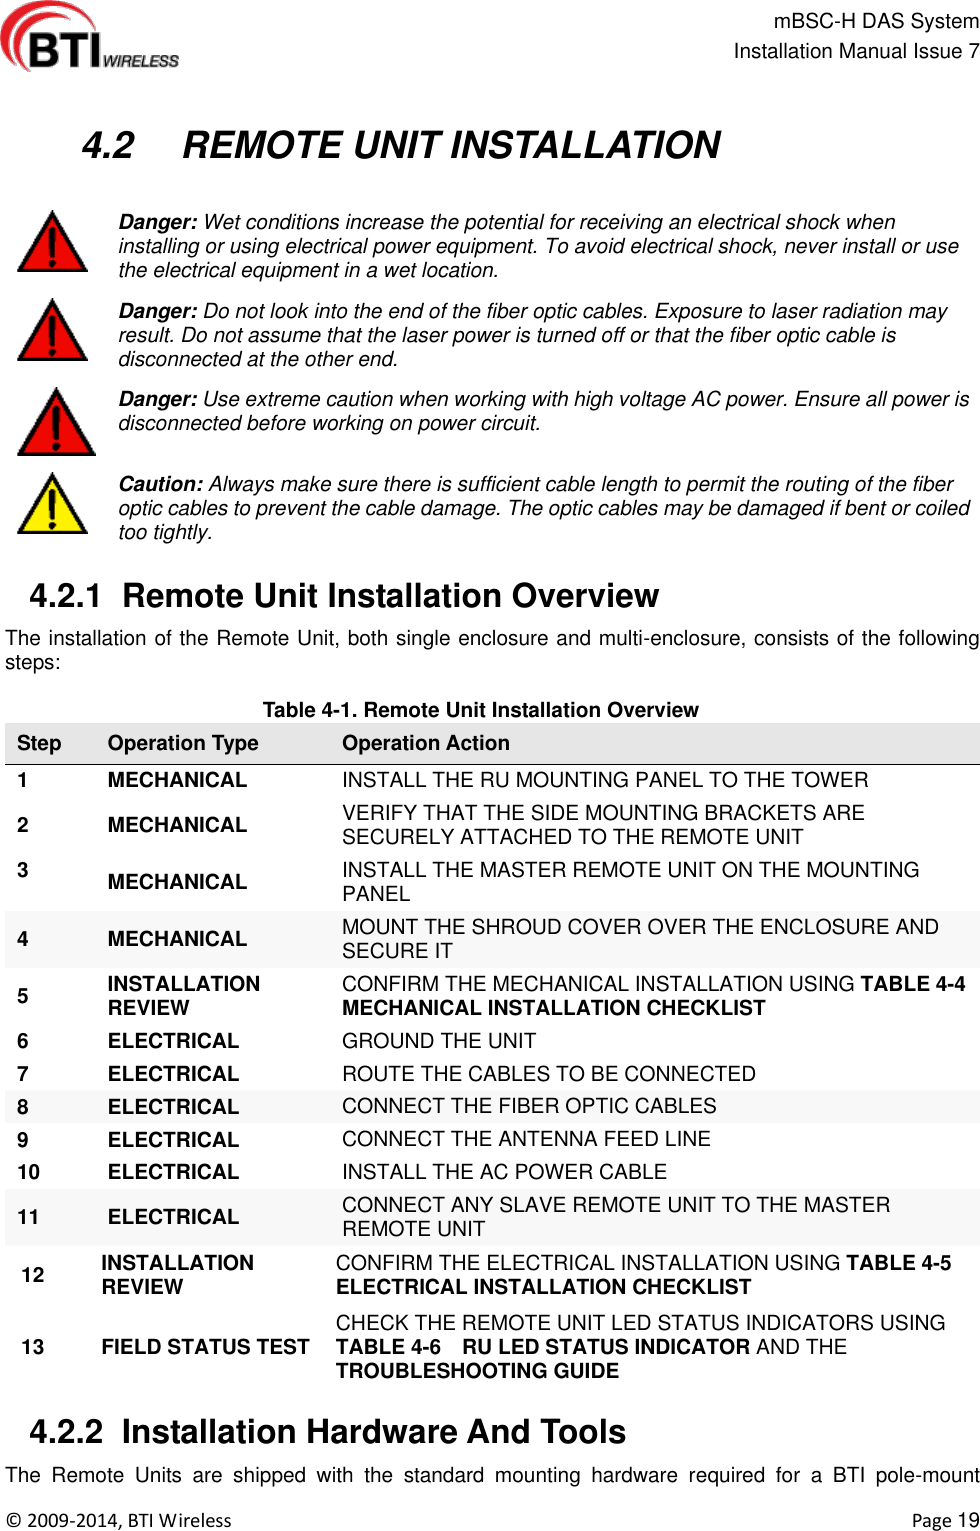                                                   mBSC-H DAS System   Installation Manual Issue 7  ©  2009-2014, BTI Wireless    Page 19    4.2   REMOTE UNIT INSTALLATION     Danger: Wet conditions increase the potential for receiving an electrical shock when installing or using electrical power equipment. To avoid electrical shock, never install or use the electrical equipment in a wet location.  Danger: Do not look into the end of the fiber optic cables. Exposure to laser radiation may result. Do not assume that the laser power is turned off or that the fiber optic cable is disconnected at the other end.  Danger: Use extreme caution when working with high voltage AC power. Ensure all power is disconnected before working on power circuit.  Caution: Always make sure there is sufficient cable length to permit the routing of the fiber optic cables to prevent the cable damage. The optic cables may be damaged if bent or coiled too tightly.   4.2.1  Remote Unit Installation Overview The installation of the Remote Unit, both single enclosure and multi-enclosure, consists of the following steps:  Table 4-1. Remote Unit Installation Overview Step Operation Type Operation Action 1 MECHANICAL INSTALL THE RU MOUNTING PANEL TO THE TOWER   2 MECHANICAL VERIFY THAT THE SIDE MOUNTING BRACKETS ARE SECURELY ATTACHED TO THE REMOTE UNIT 3 MECHANICAL INSTALL THE MASTER REMOTE UNIT ON THE MOUNTING PANEL 4 MECHANICAL MOUNT THE SHROUD COVER OVER THE ENCLOSURE AND SECURE IT 5 INSTALLATION REVIEW CONFIRM THE MECHANICAL INSTALLATION USING TABLE 4-4 MECHANICAL INSTALLATION CHECKLIST 6 ELECTRICAL GROUND THE UNIT 7 ELECTRICAL ROUTE THE CABLES TO BE CONNECTED 8 ELECTRICAL CONNECT THE FIBER OPTIC CABLES 9 ELECTRICAL CONNECT THE ANTENNA FEED LINE 10 ELECTRICAL INSTALL THE AC POWER CABLE 11 ELECTRICAL CONNECT ANY SLAVE REMOTE UNIT TO THE MASTER REMOTE UNIT    12 INSTALLATION REVIEW CONFIRM THE ELECTRICAL INSTALLATION USING TABLE 4-5 ELECTRICAL INSTALLATION CHECKLIST  13 FIELD STATUS TEST CHECK THE REMOTE UNIT LED STATUS INDICATORS USING TABLE 4-6   RU LED STATUS INDICATOR AND THE TROUBLESHOOTING GUIDE   4.2.2  Installation Hardware And Tools The  Remote  Units  are  shipped  with  the  standard  mounting  hardware  required  for  a  BTI  pole-mount 